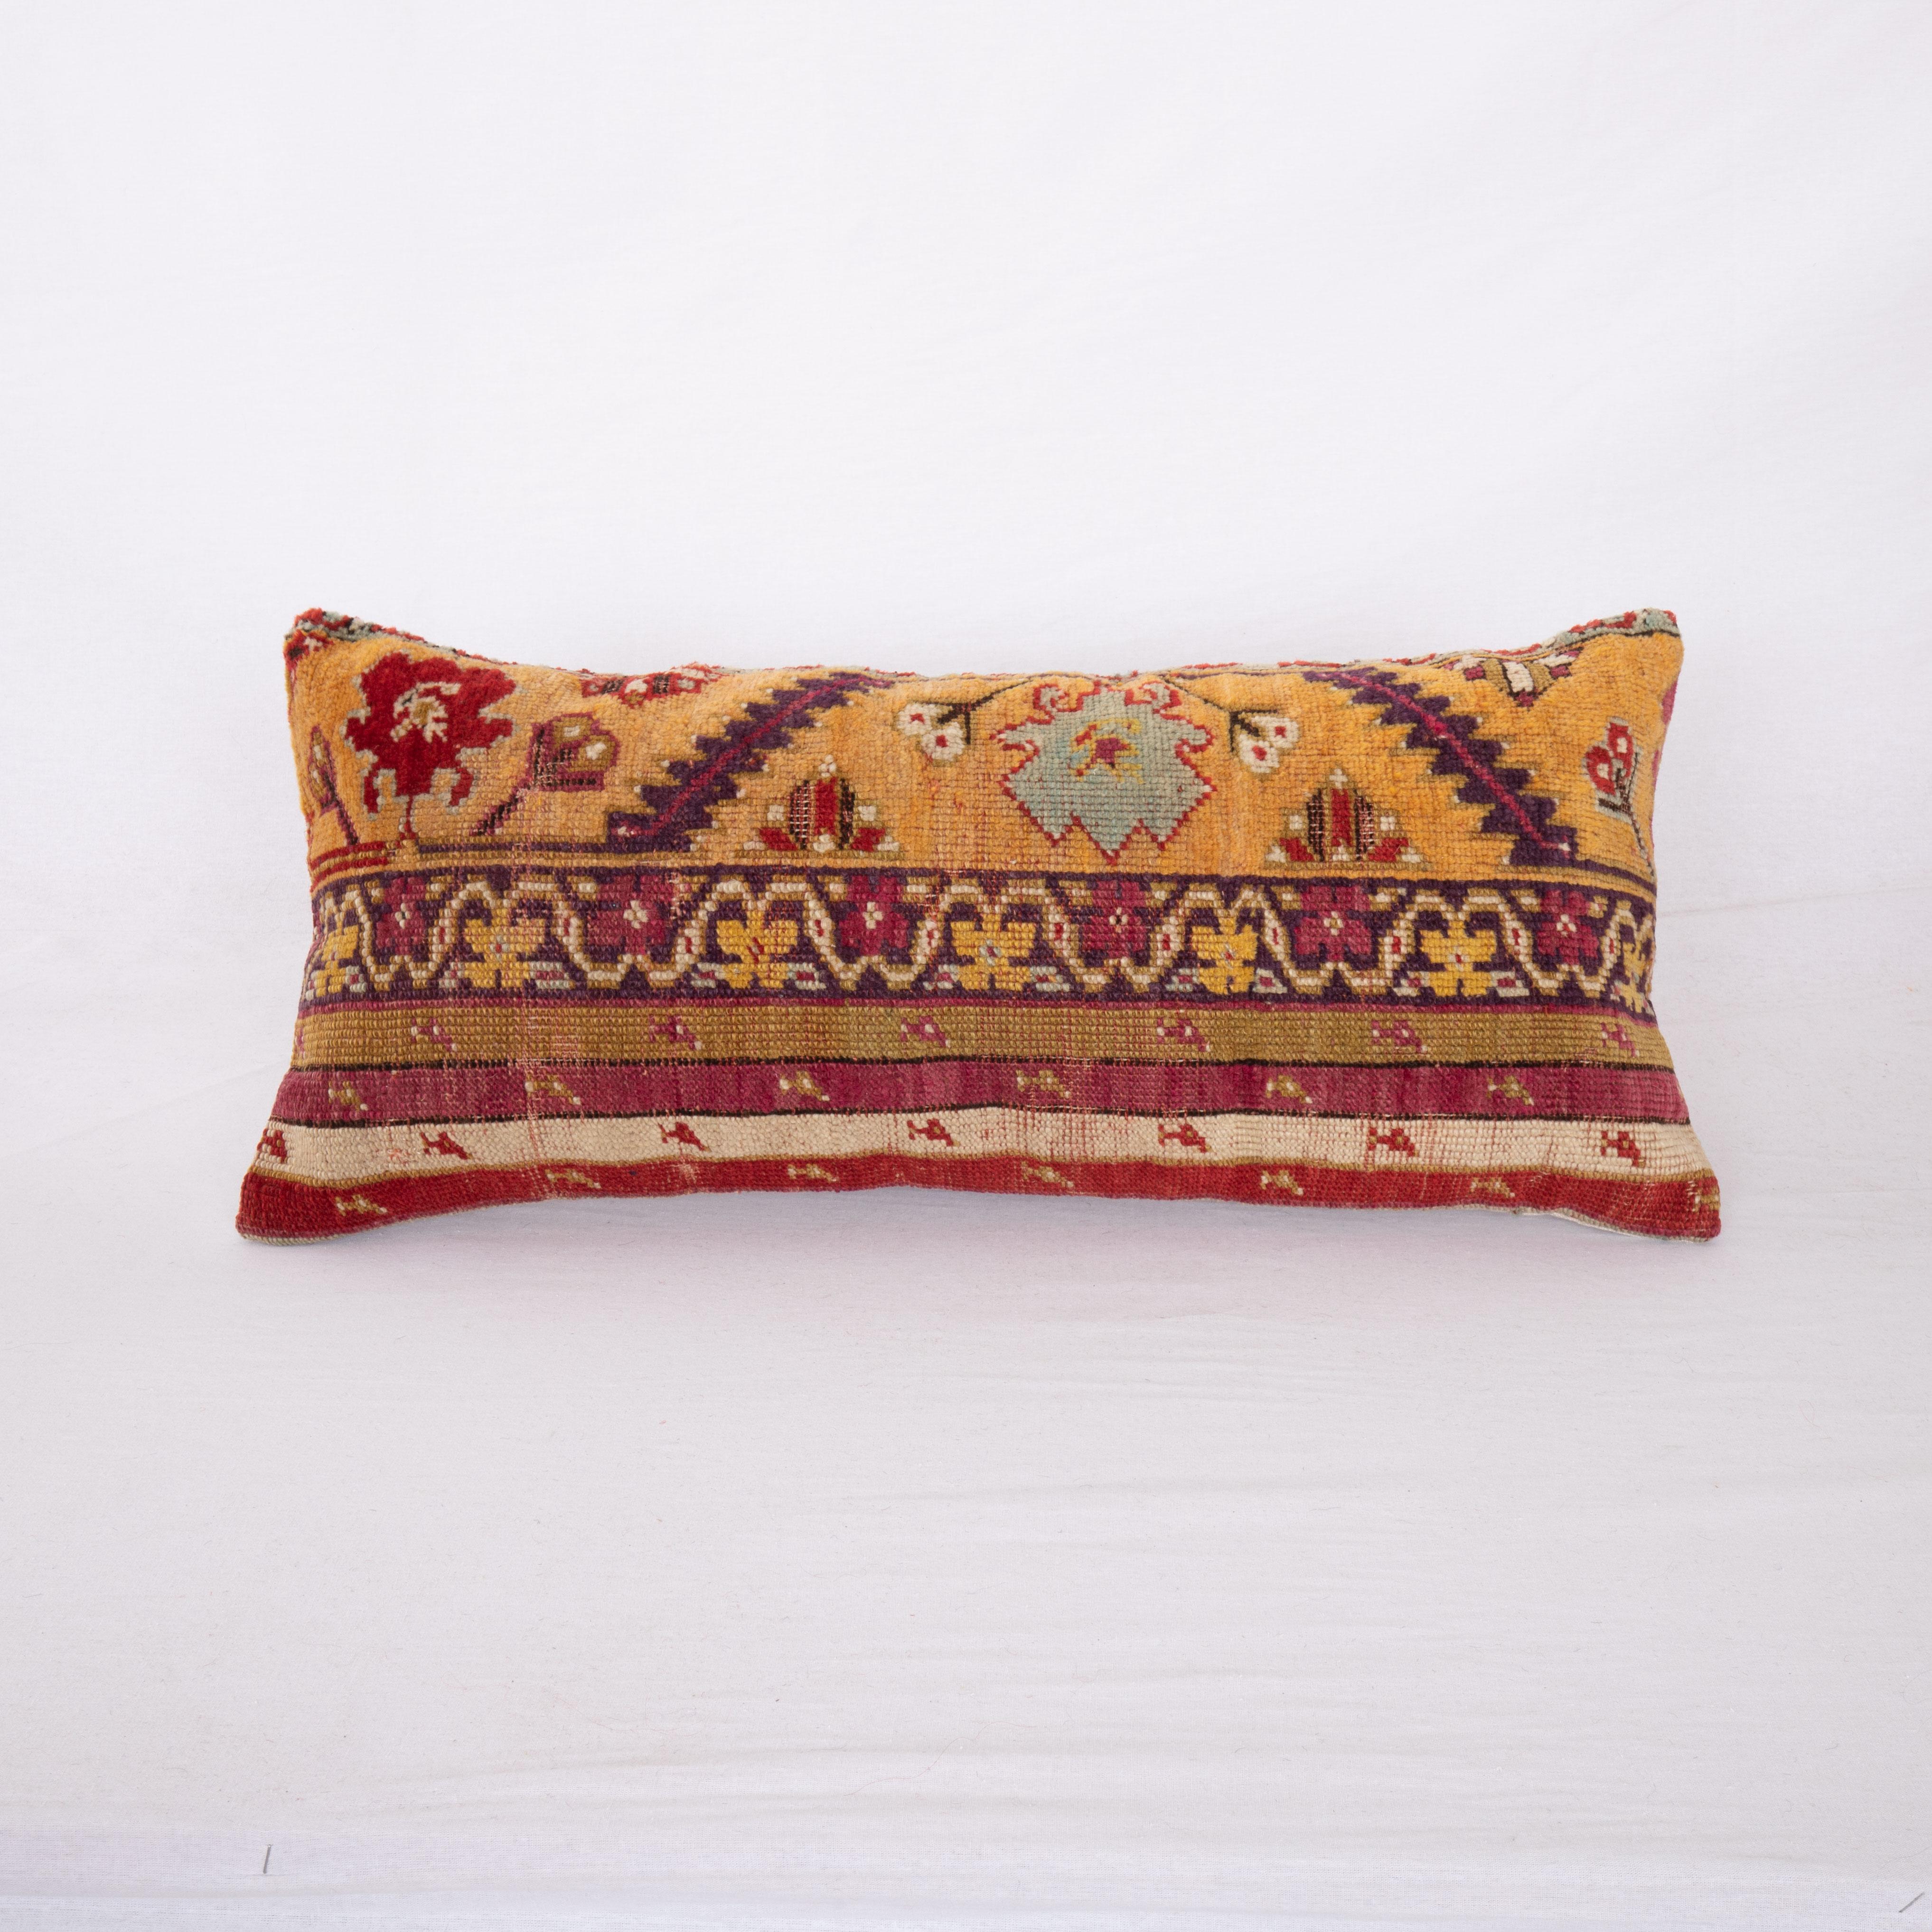 This pillow cover is made from an antique 19th C. Central Anatolian, Kirsehir rug fragment.

It does not come with an insert.
Linen in the back.
Zipper closure.
Dry Cleaning is recommended.